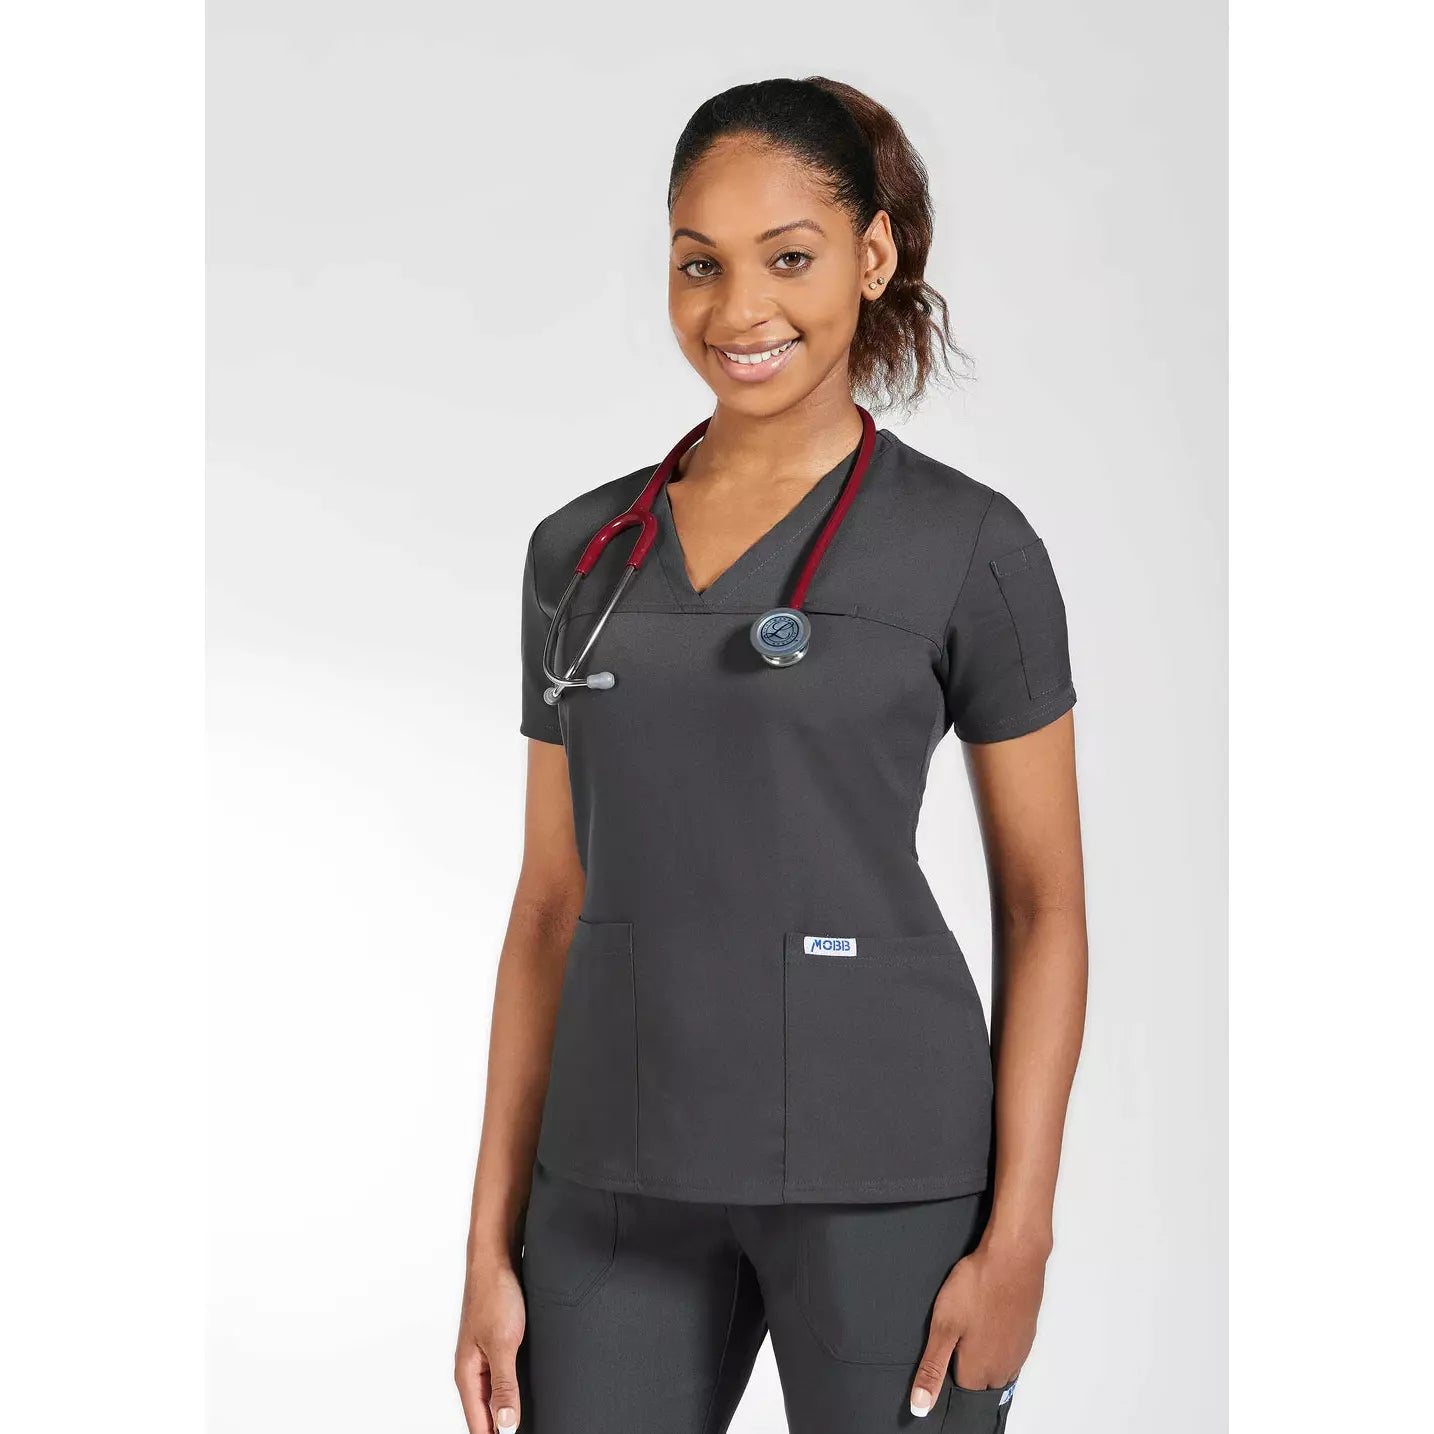 Classic V-Neck Scrub Top The Rosey T3030